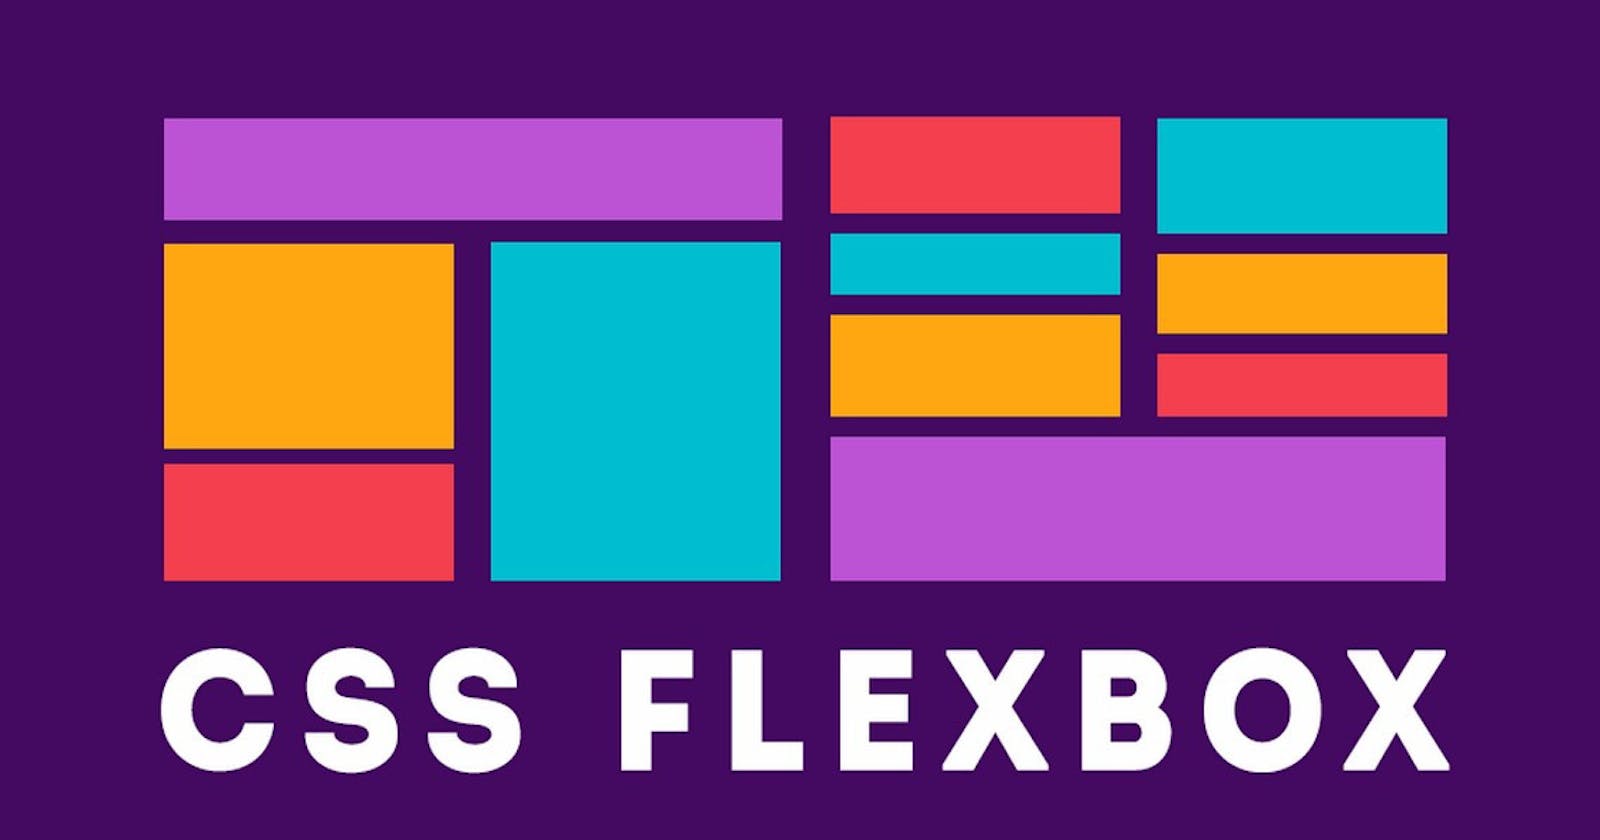 Everything  about  CSS  Flexbox and  its  Properties  you  should  know...